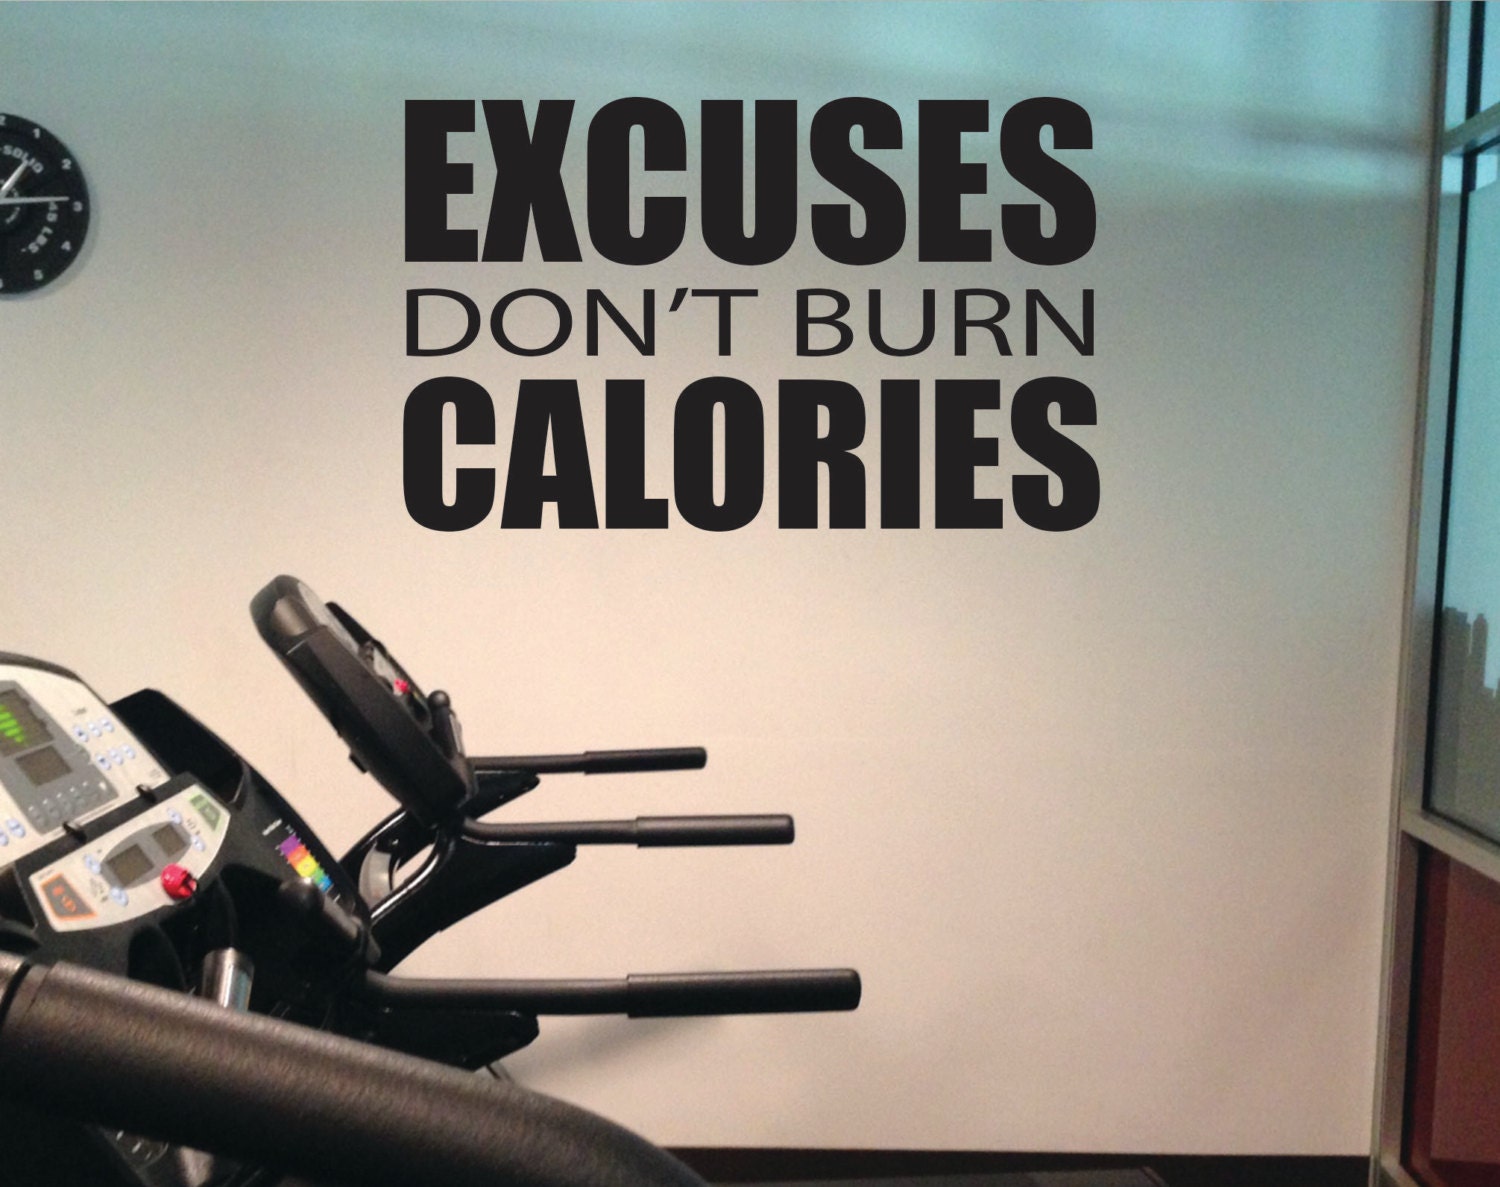 Excuses Don't Burn Calories Motivational Gym Wall Art Decal Quote 